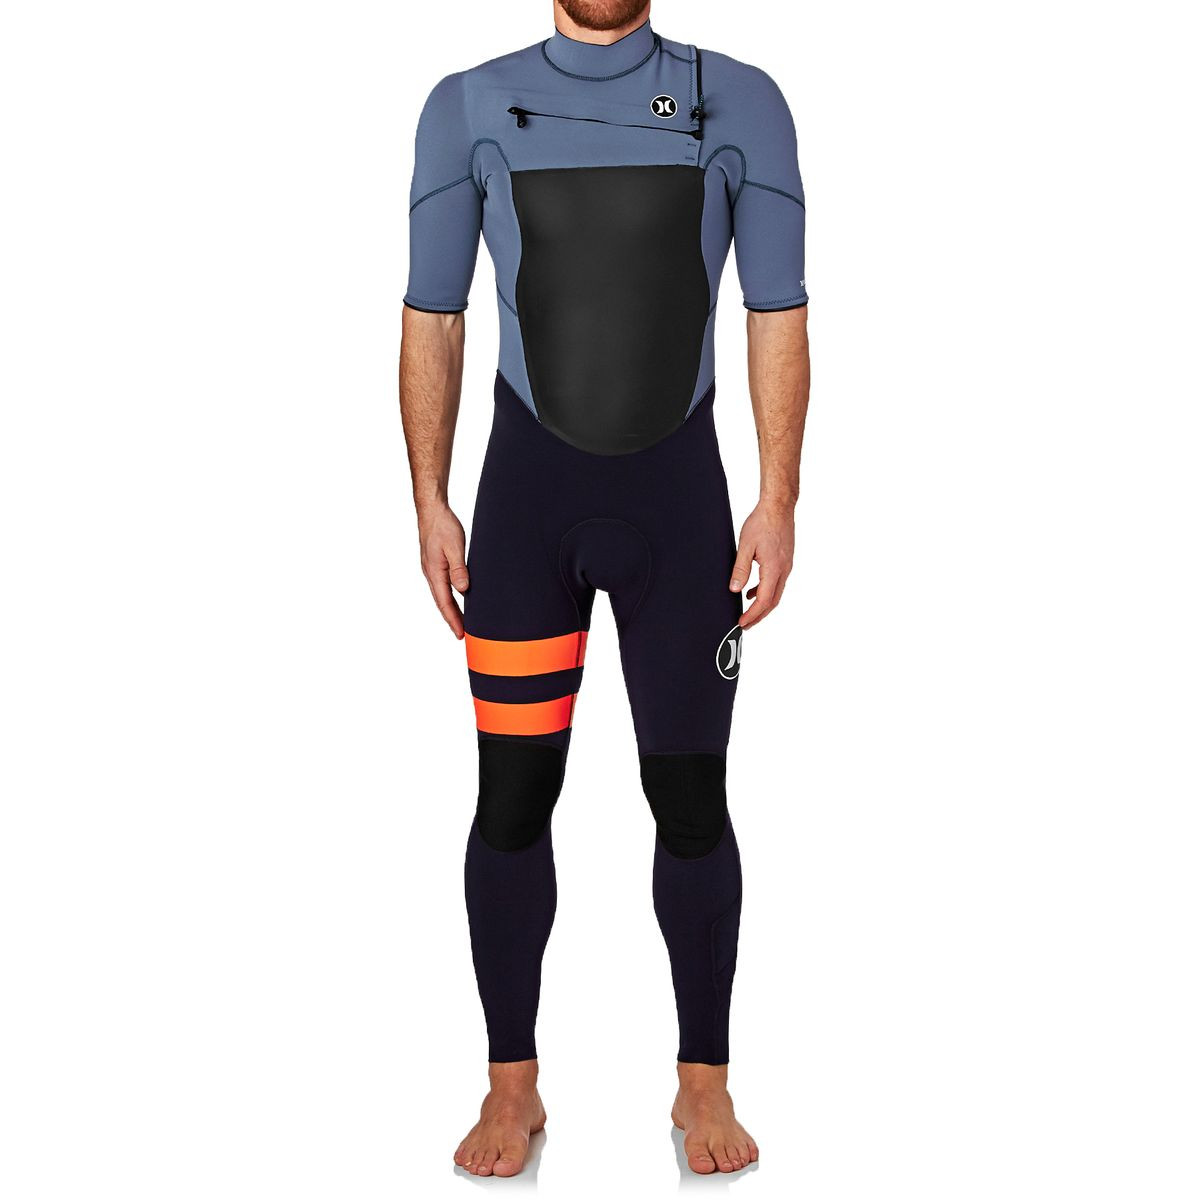 Hurley Fusion 2mm 2017 Chest Zip Short Sleeve Wetsuit - Obsidian